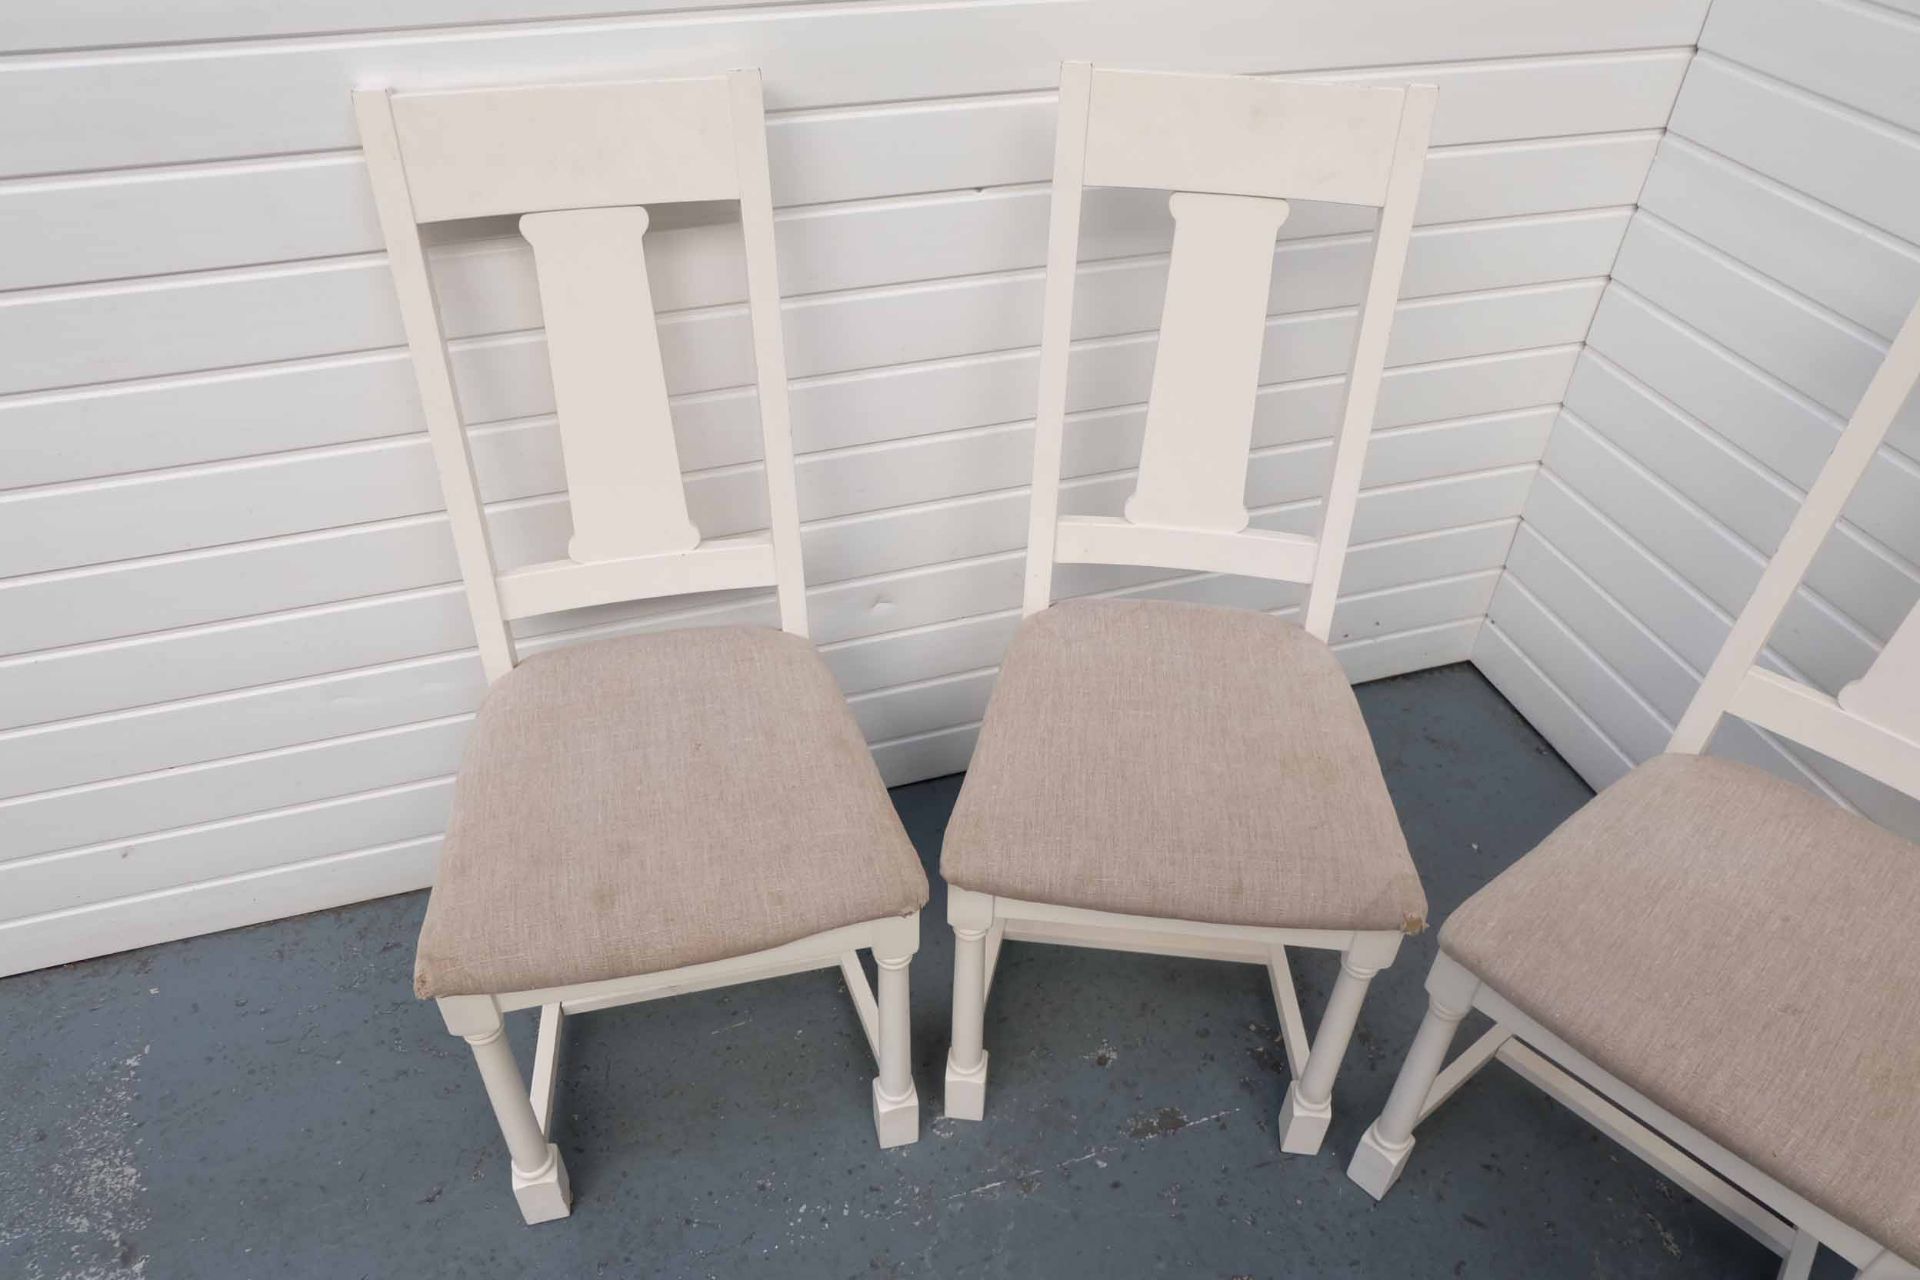 Set of 5 White Wooden Dining Chairs With Upholstered Seats. - Image 2 of 8